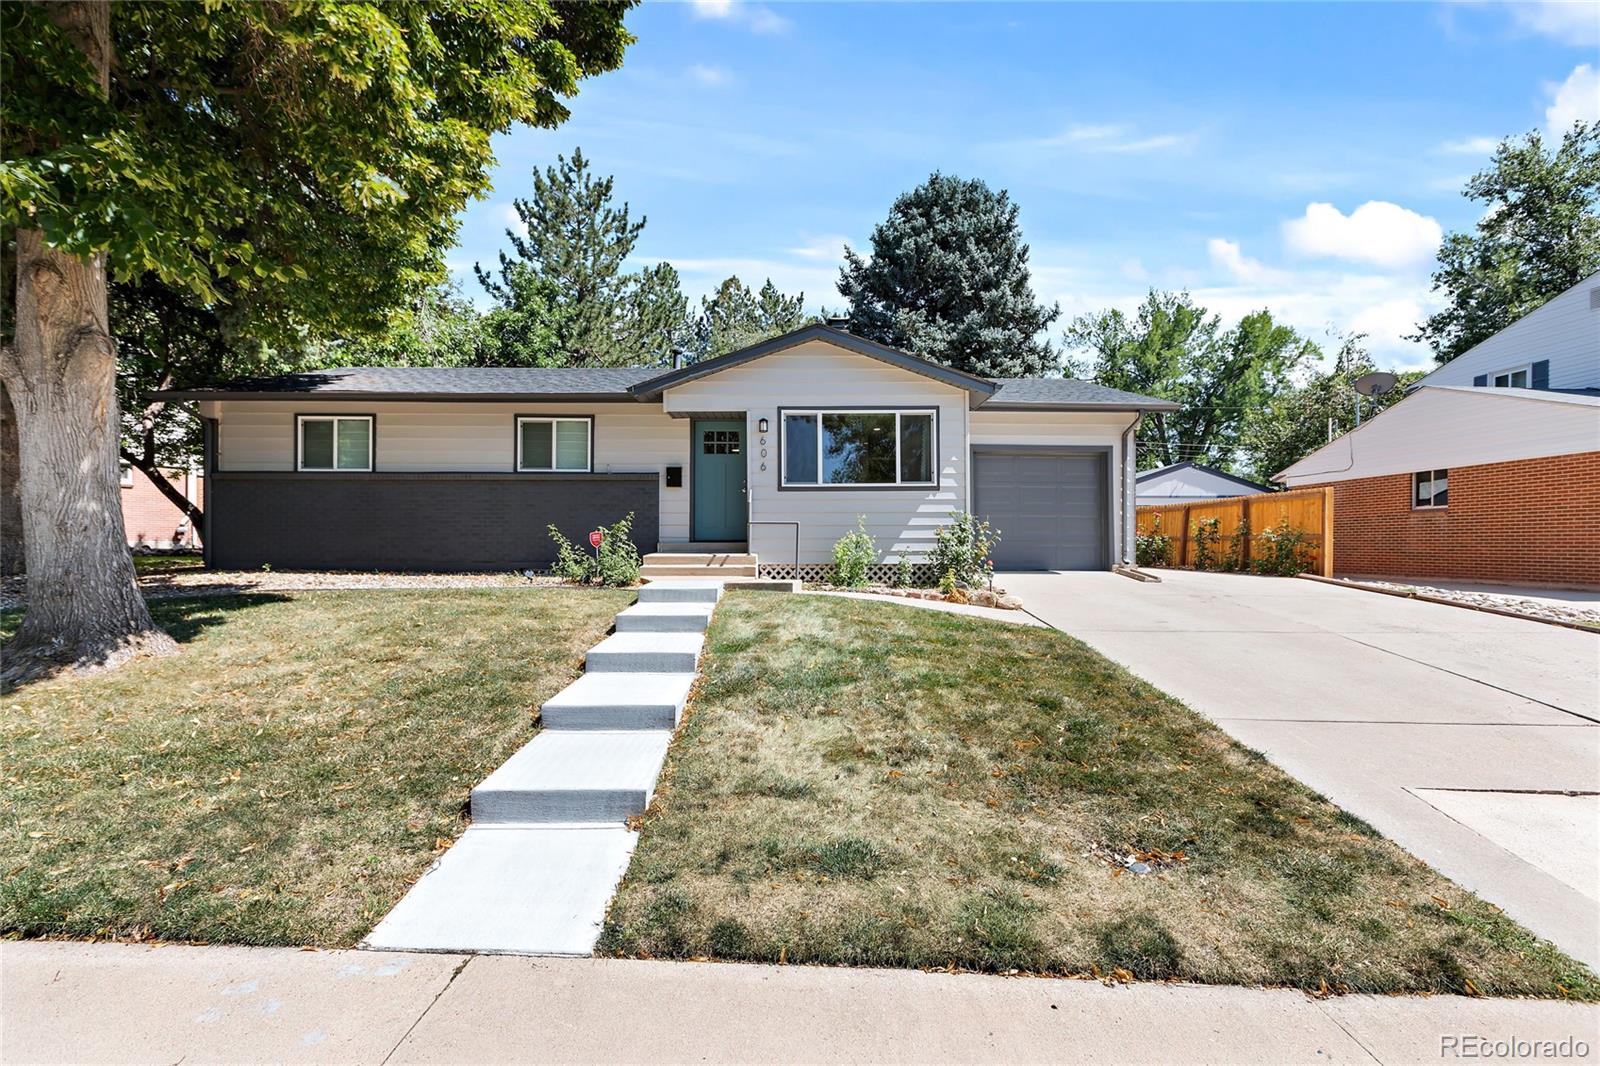 606 w davies way, Littleton sold home. Closed on 2023-11-09 for $705,000.